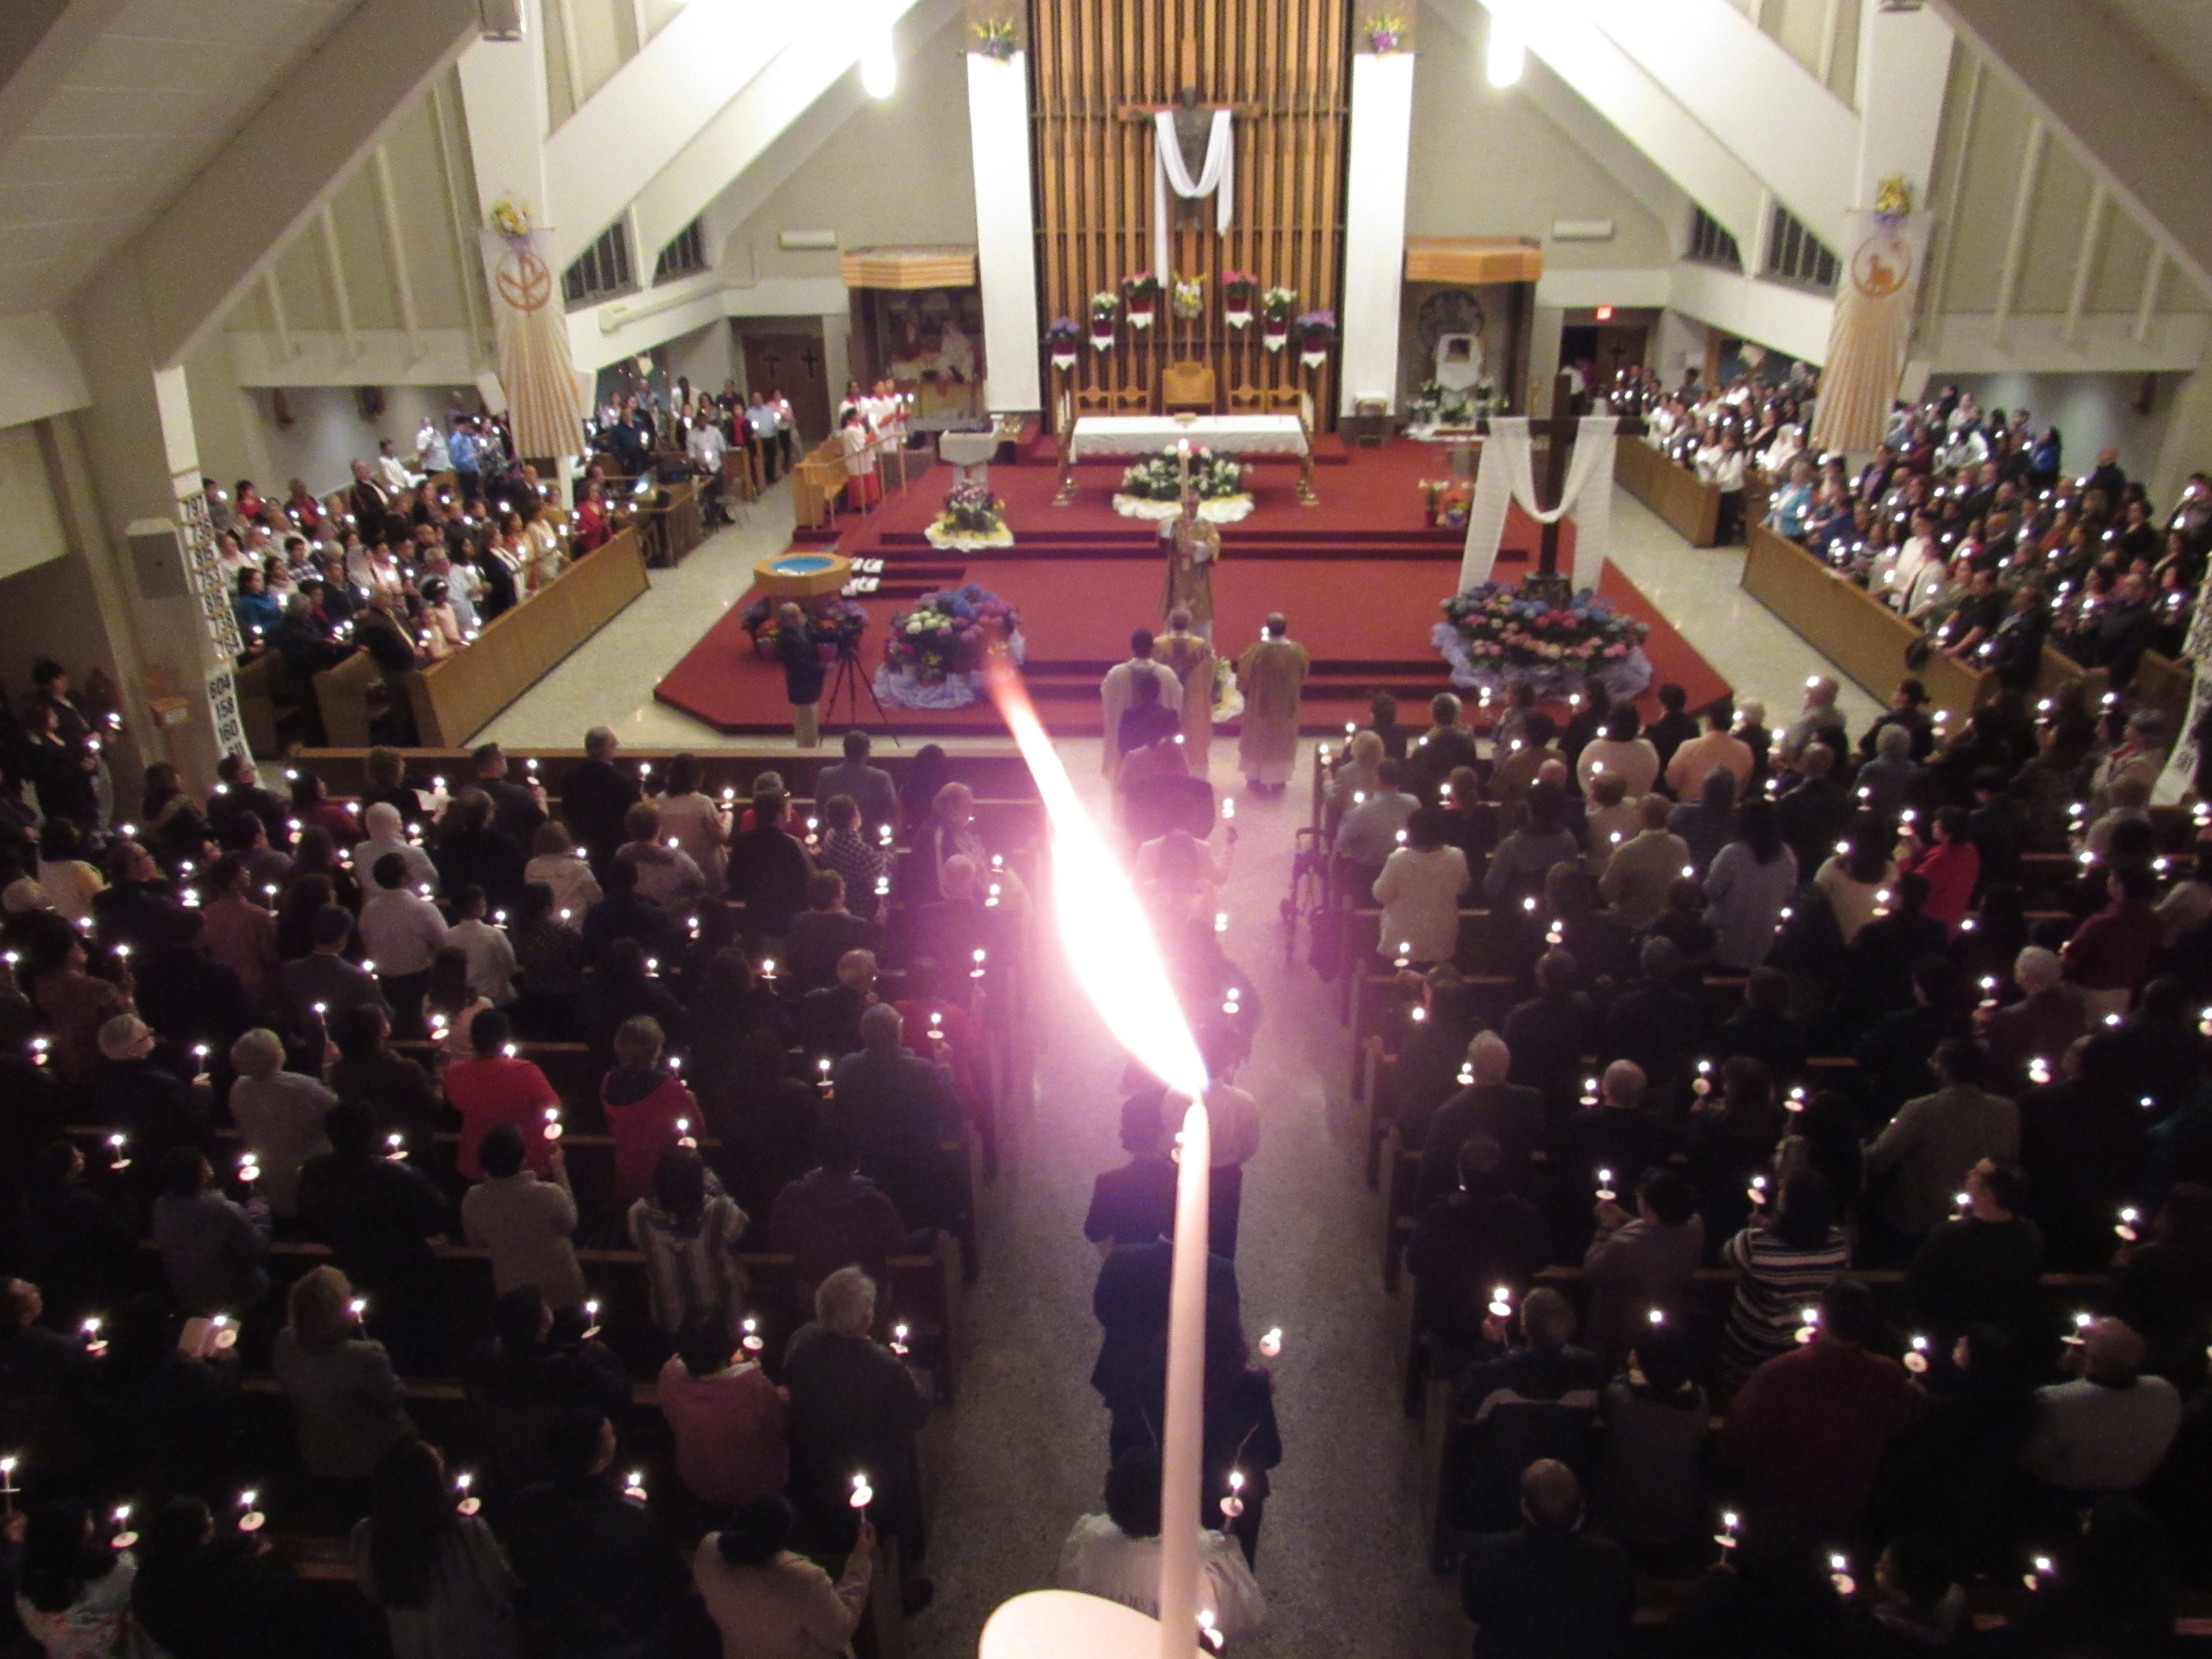 Lit candles inside the church during the Easter vigil.